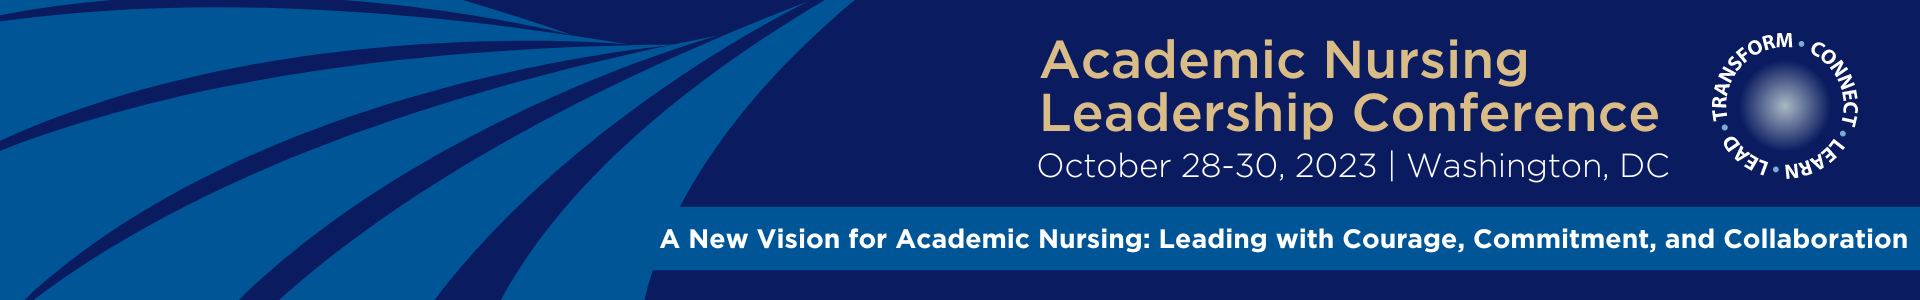 american association of colleges of nursing | The voice of academic nursing | academic nursing leadership conference | Washington, DC | transform. connect. learn. lead